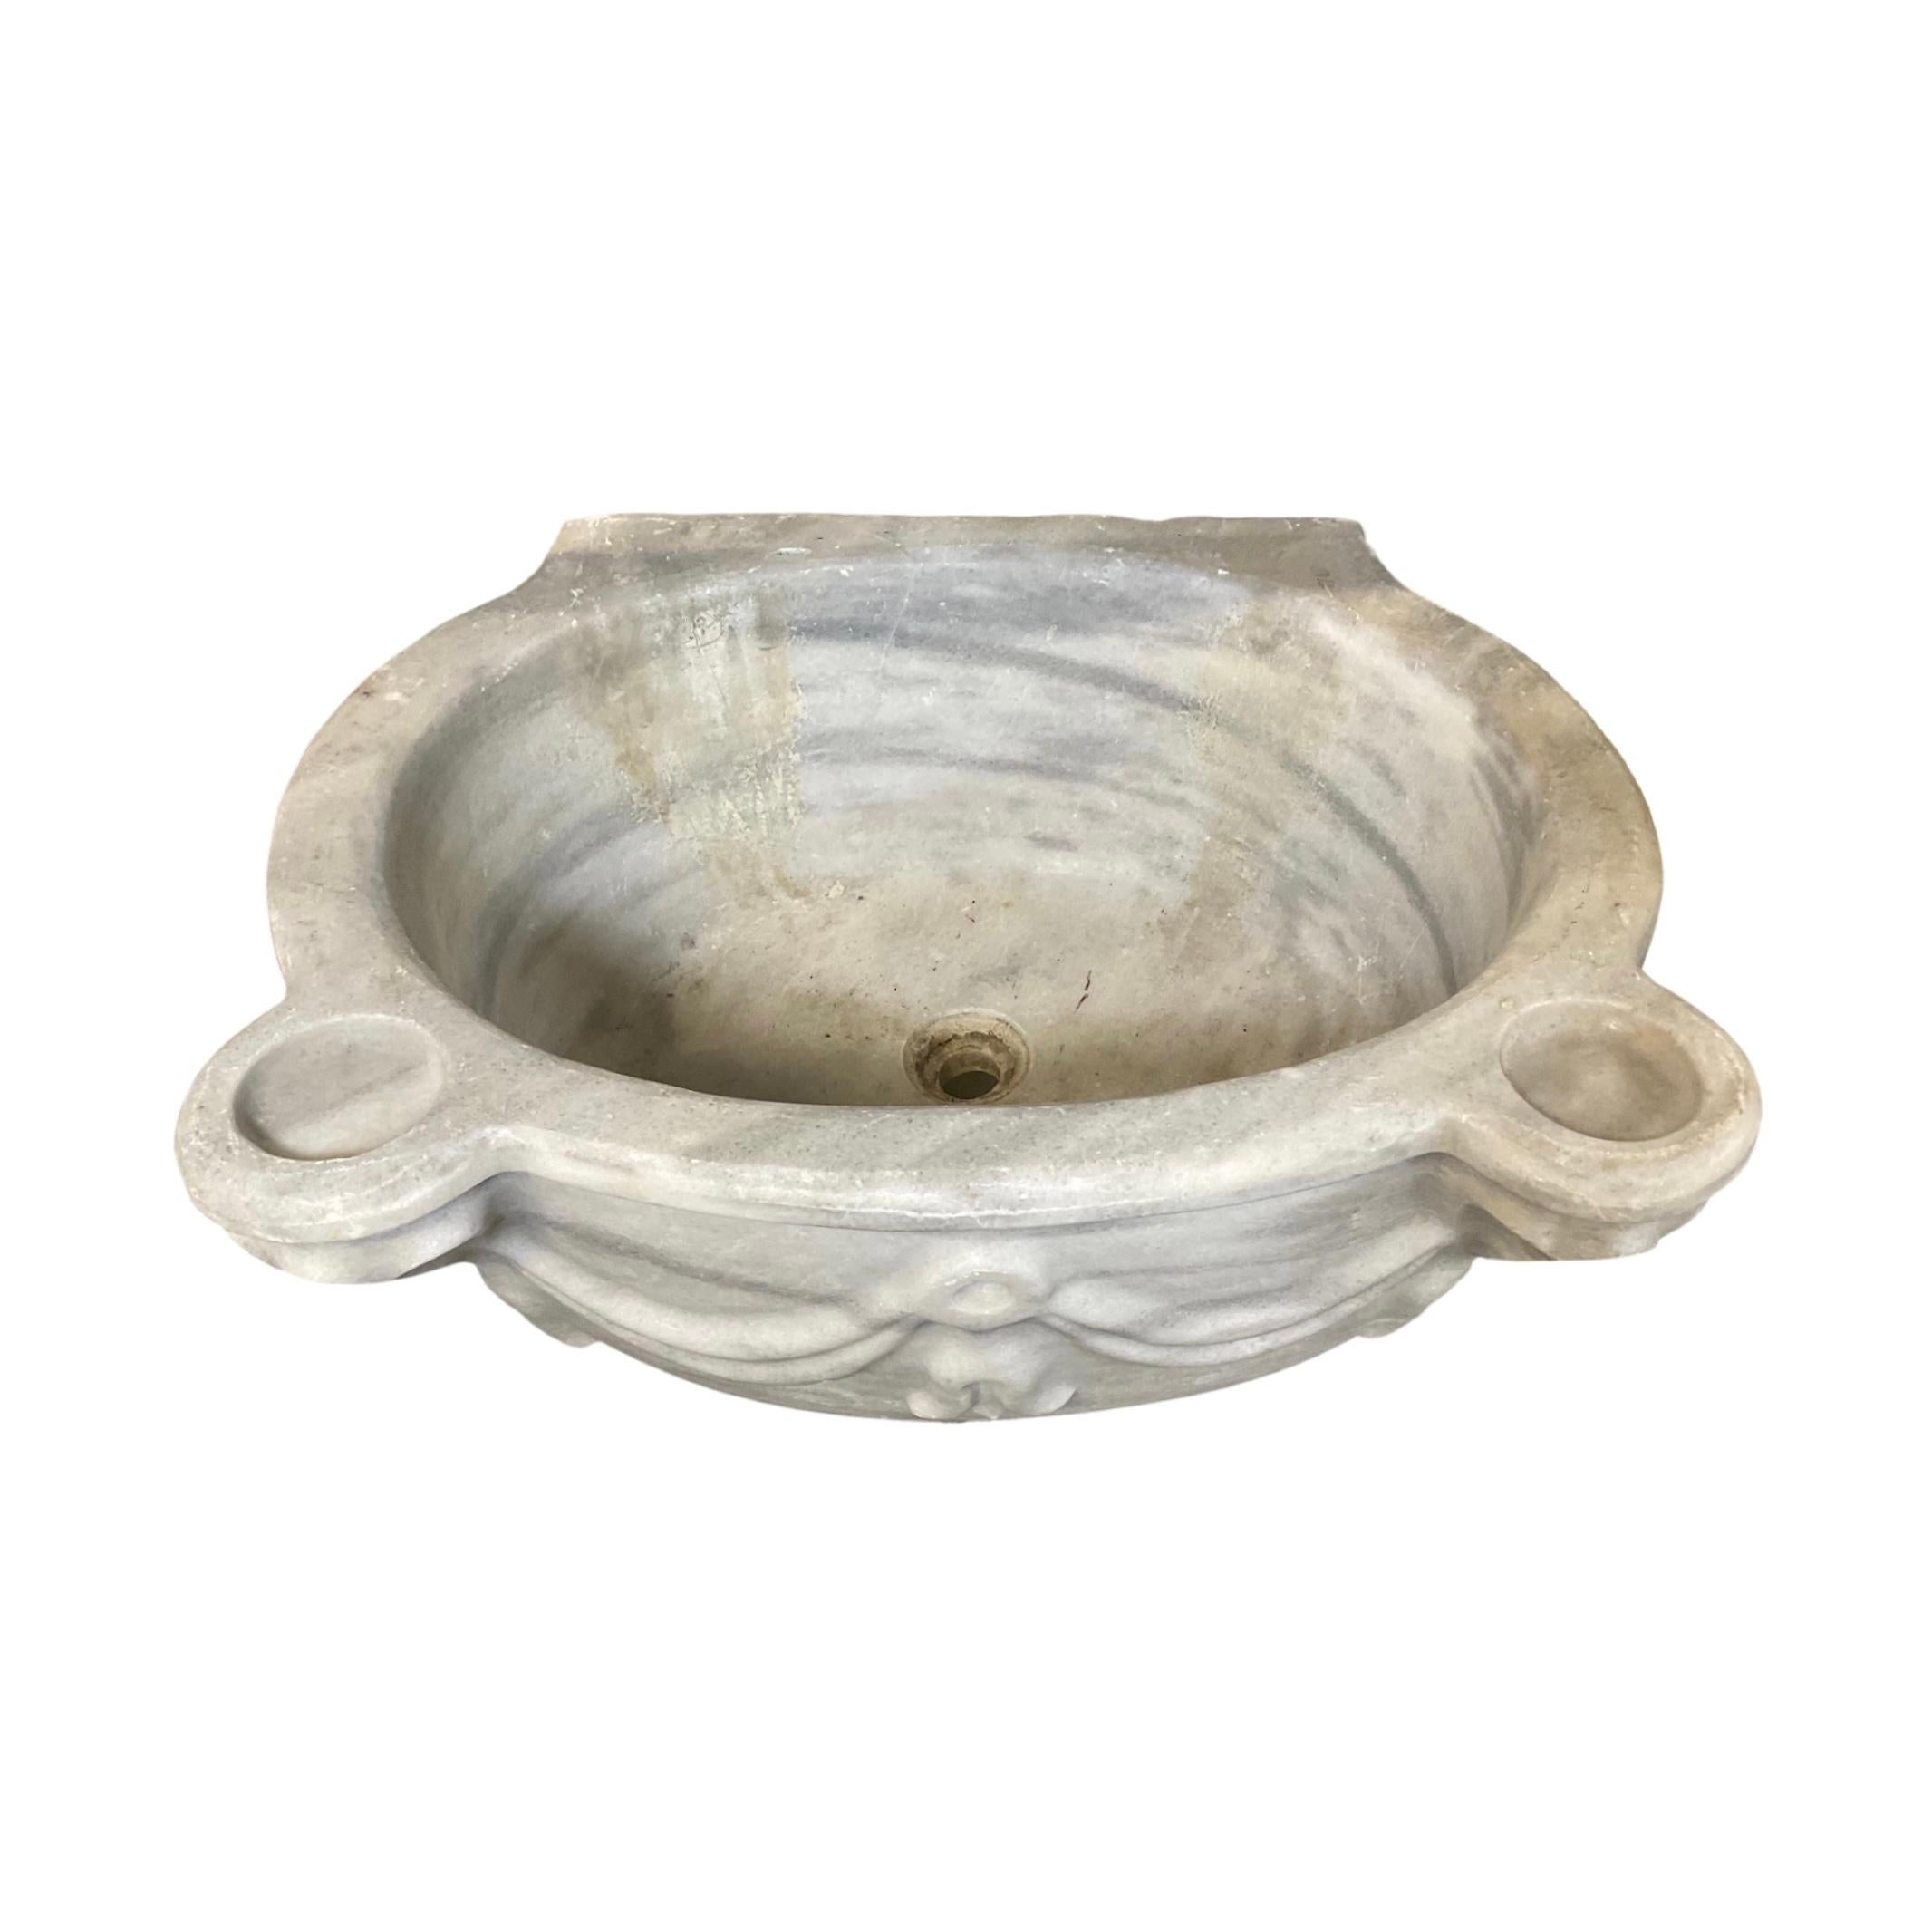 This stunning French white marble sink is an exact replica of the ones installed in palaces during the 18th century. Its timeless look and classic design will easily elevate the style of any bathroom.